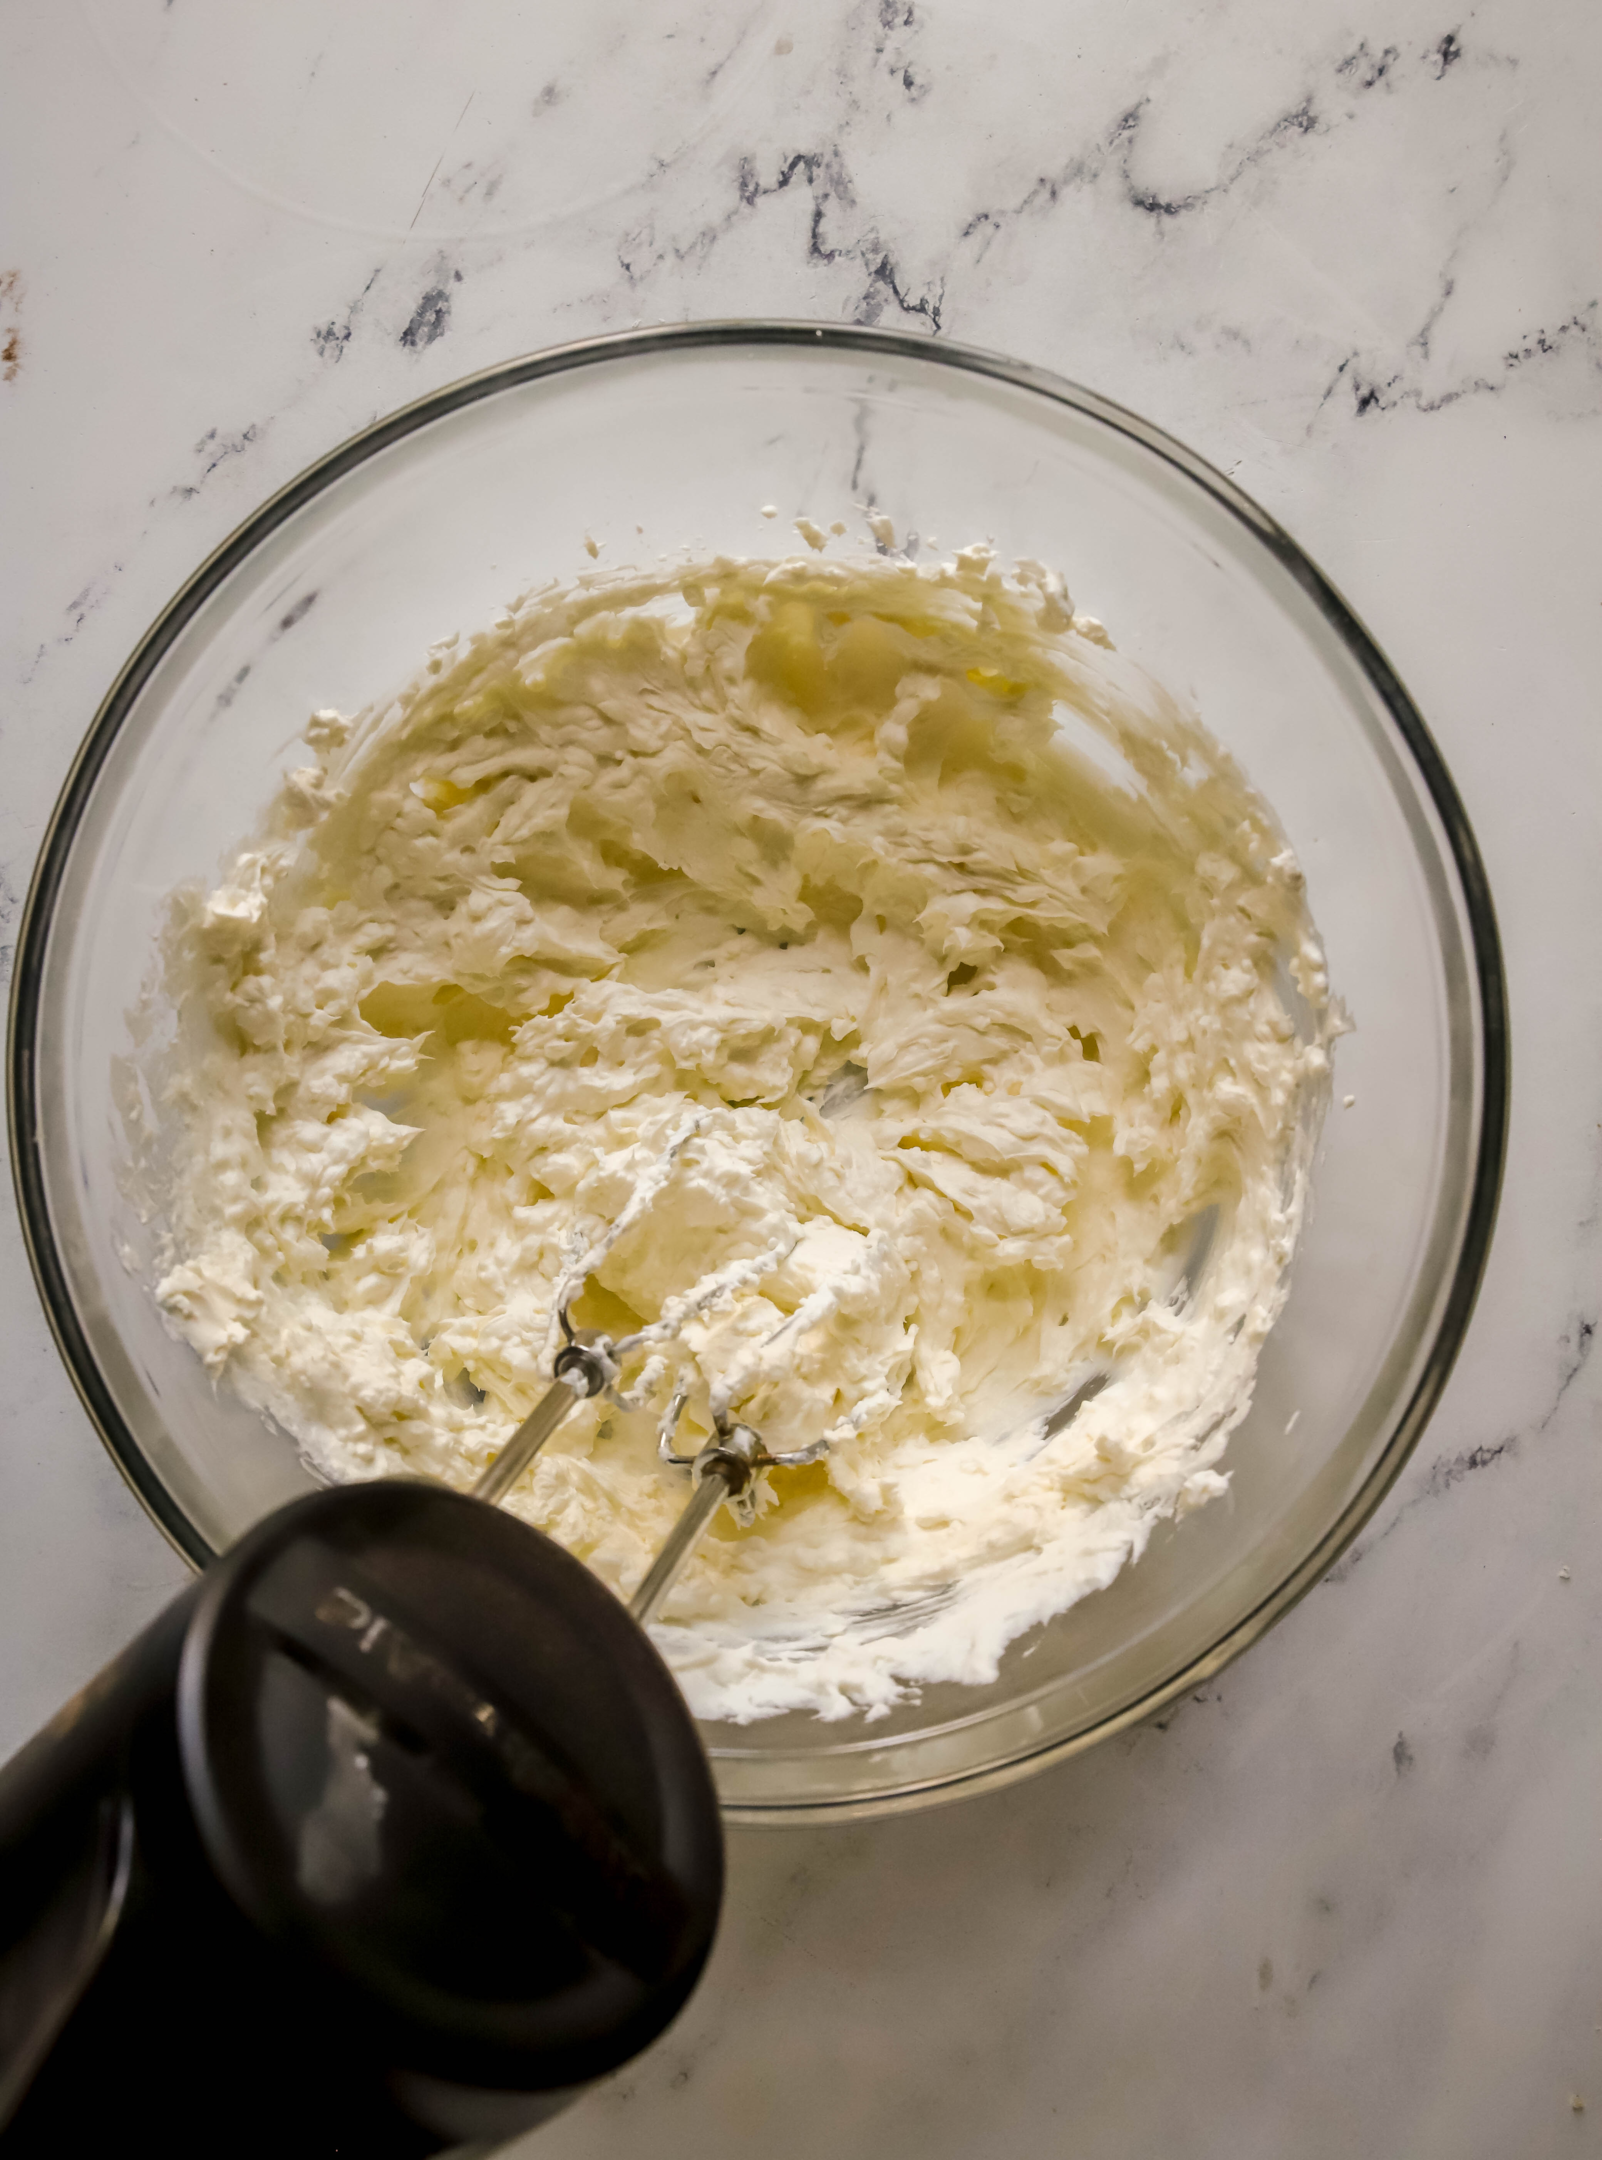 cream cheese and whipped cream being whipped together with a hand mixer